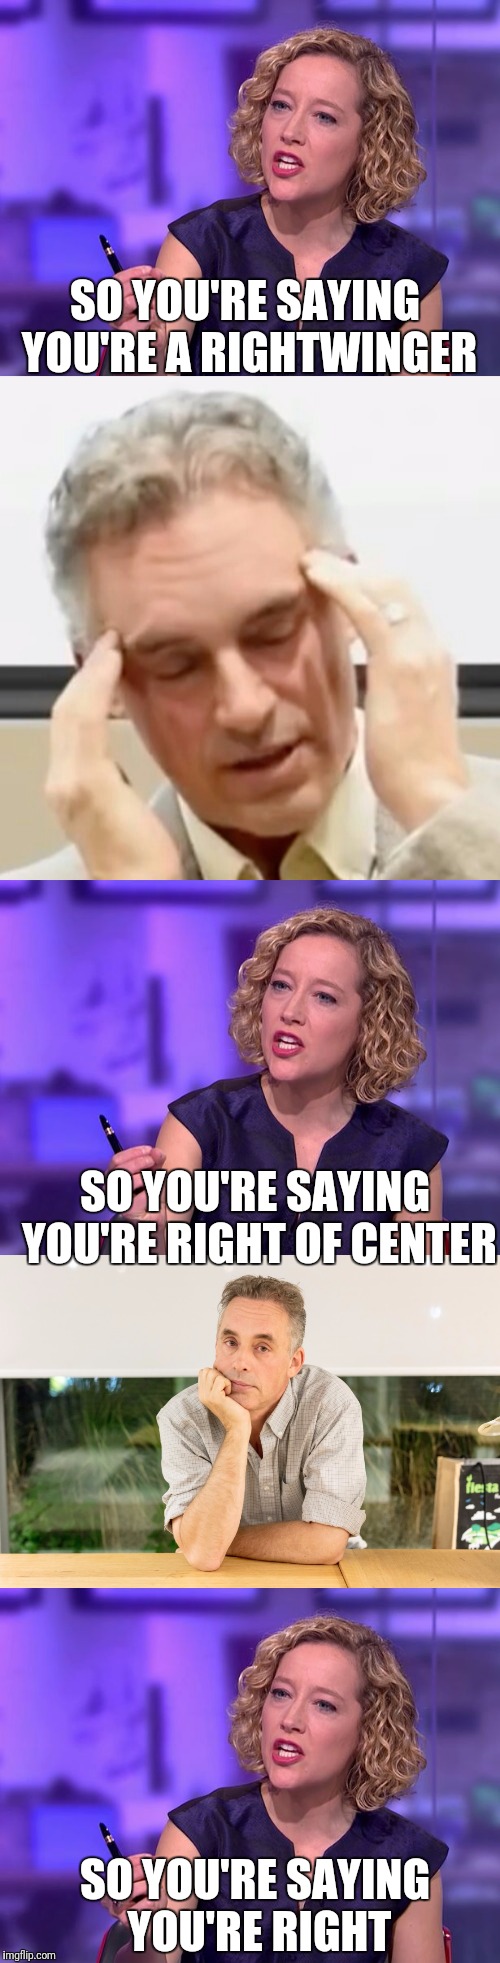 SO YOU'RE SAYING YOU'RE A RIGHTWINGER SO YOU'RE SAYING YOU'RE RIGHT OF CENTER SO YOU'RE SAYING YOU'RE RIGHT | made w/ Imgflip meme maker